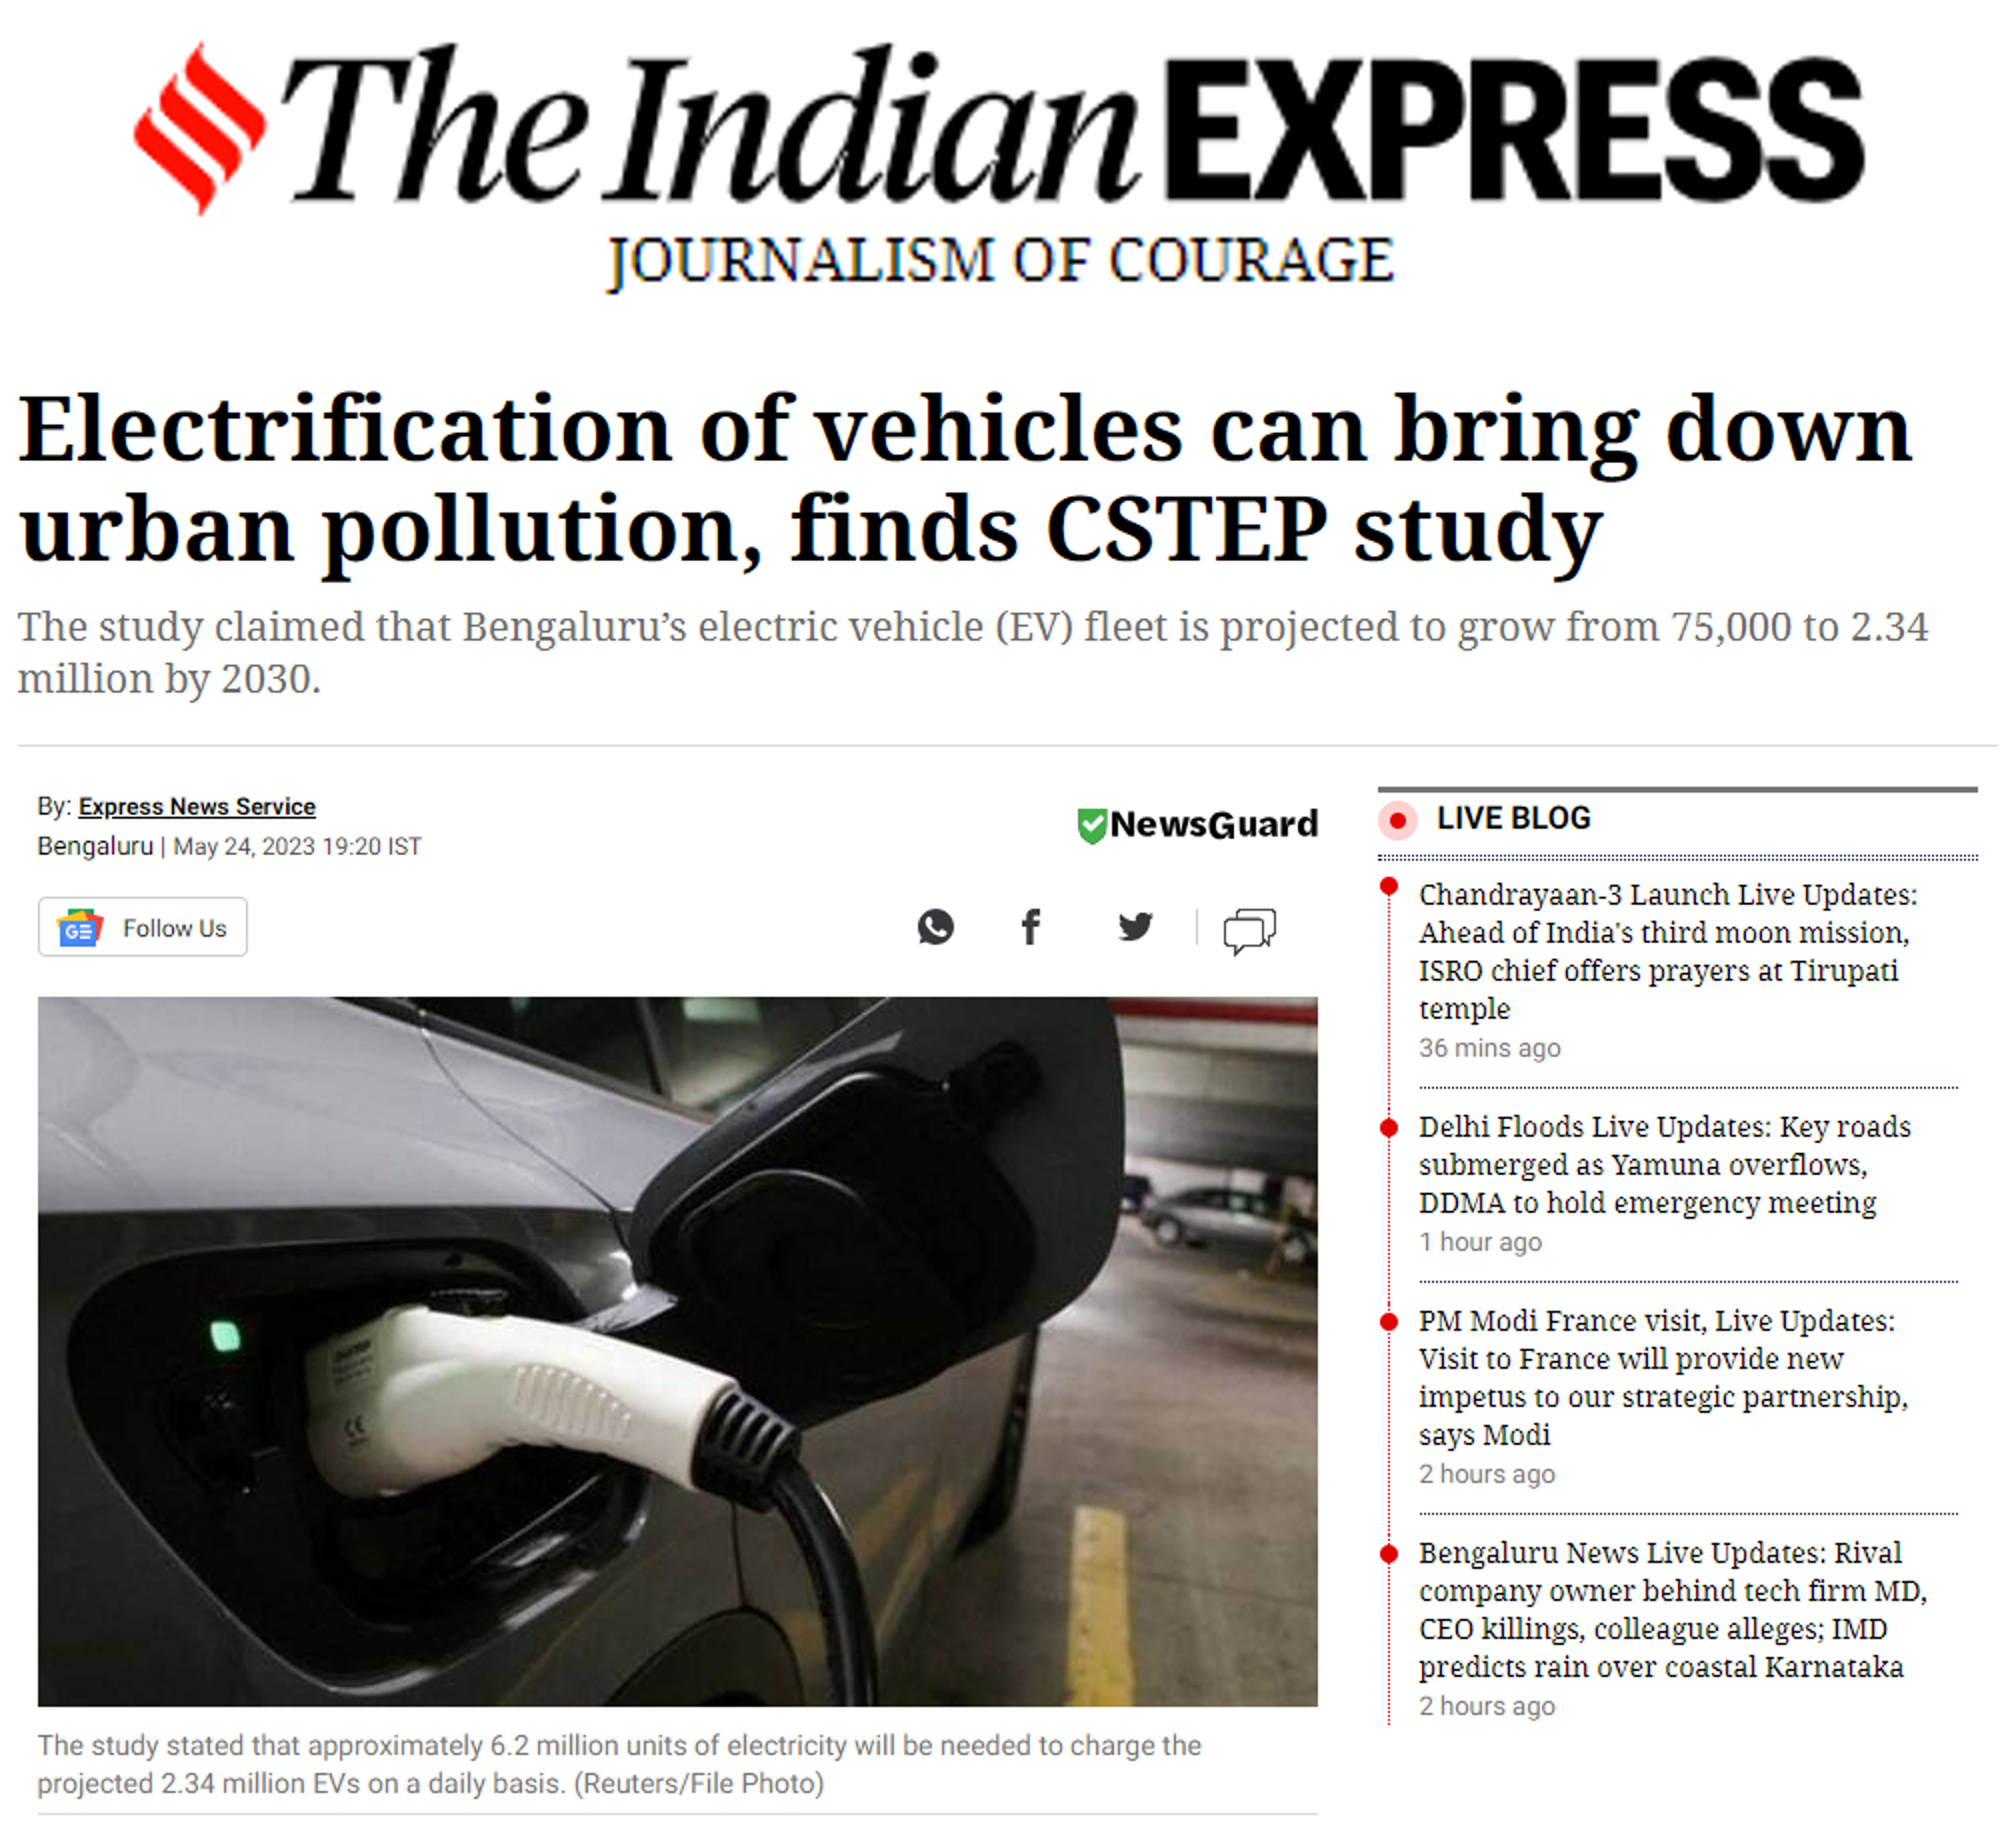 CSTEP’s study on the impact of electric vehicles on urban pollution covered by The Indian Express